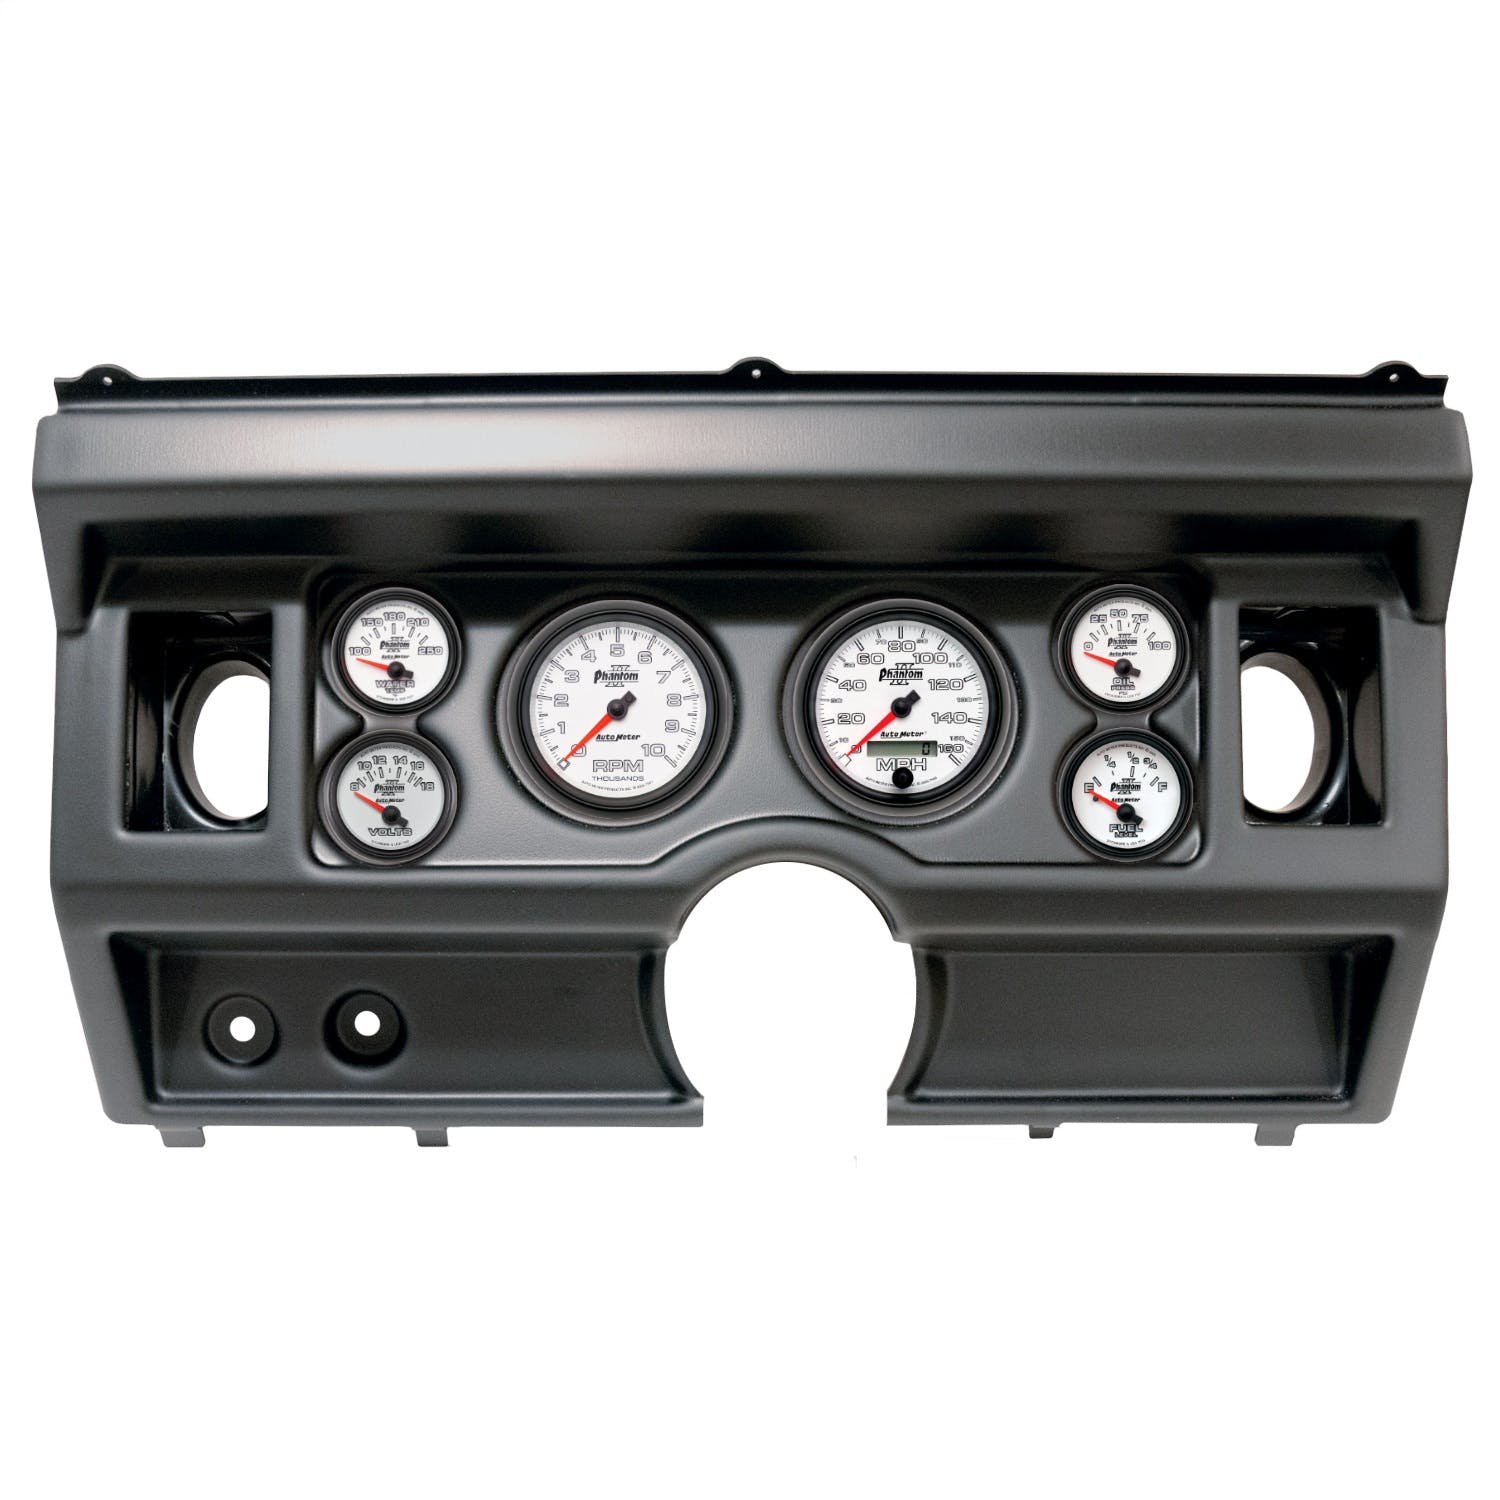 AutoMeter Products 2919-10 6 Gauge Direct-Fit Dash Kit, Ford Truck Ac 80-86, Phantom II